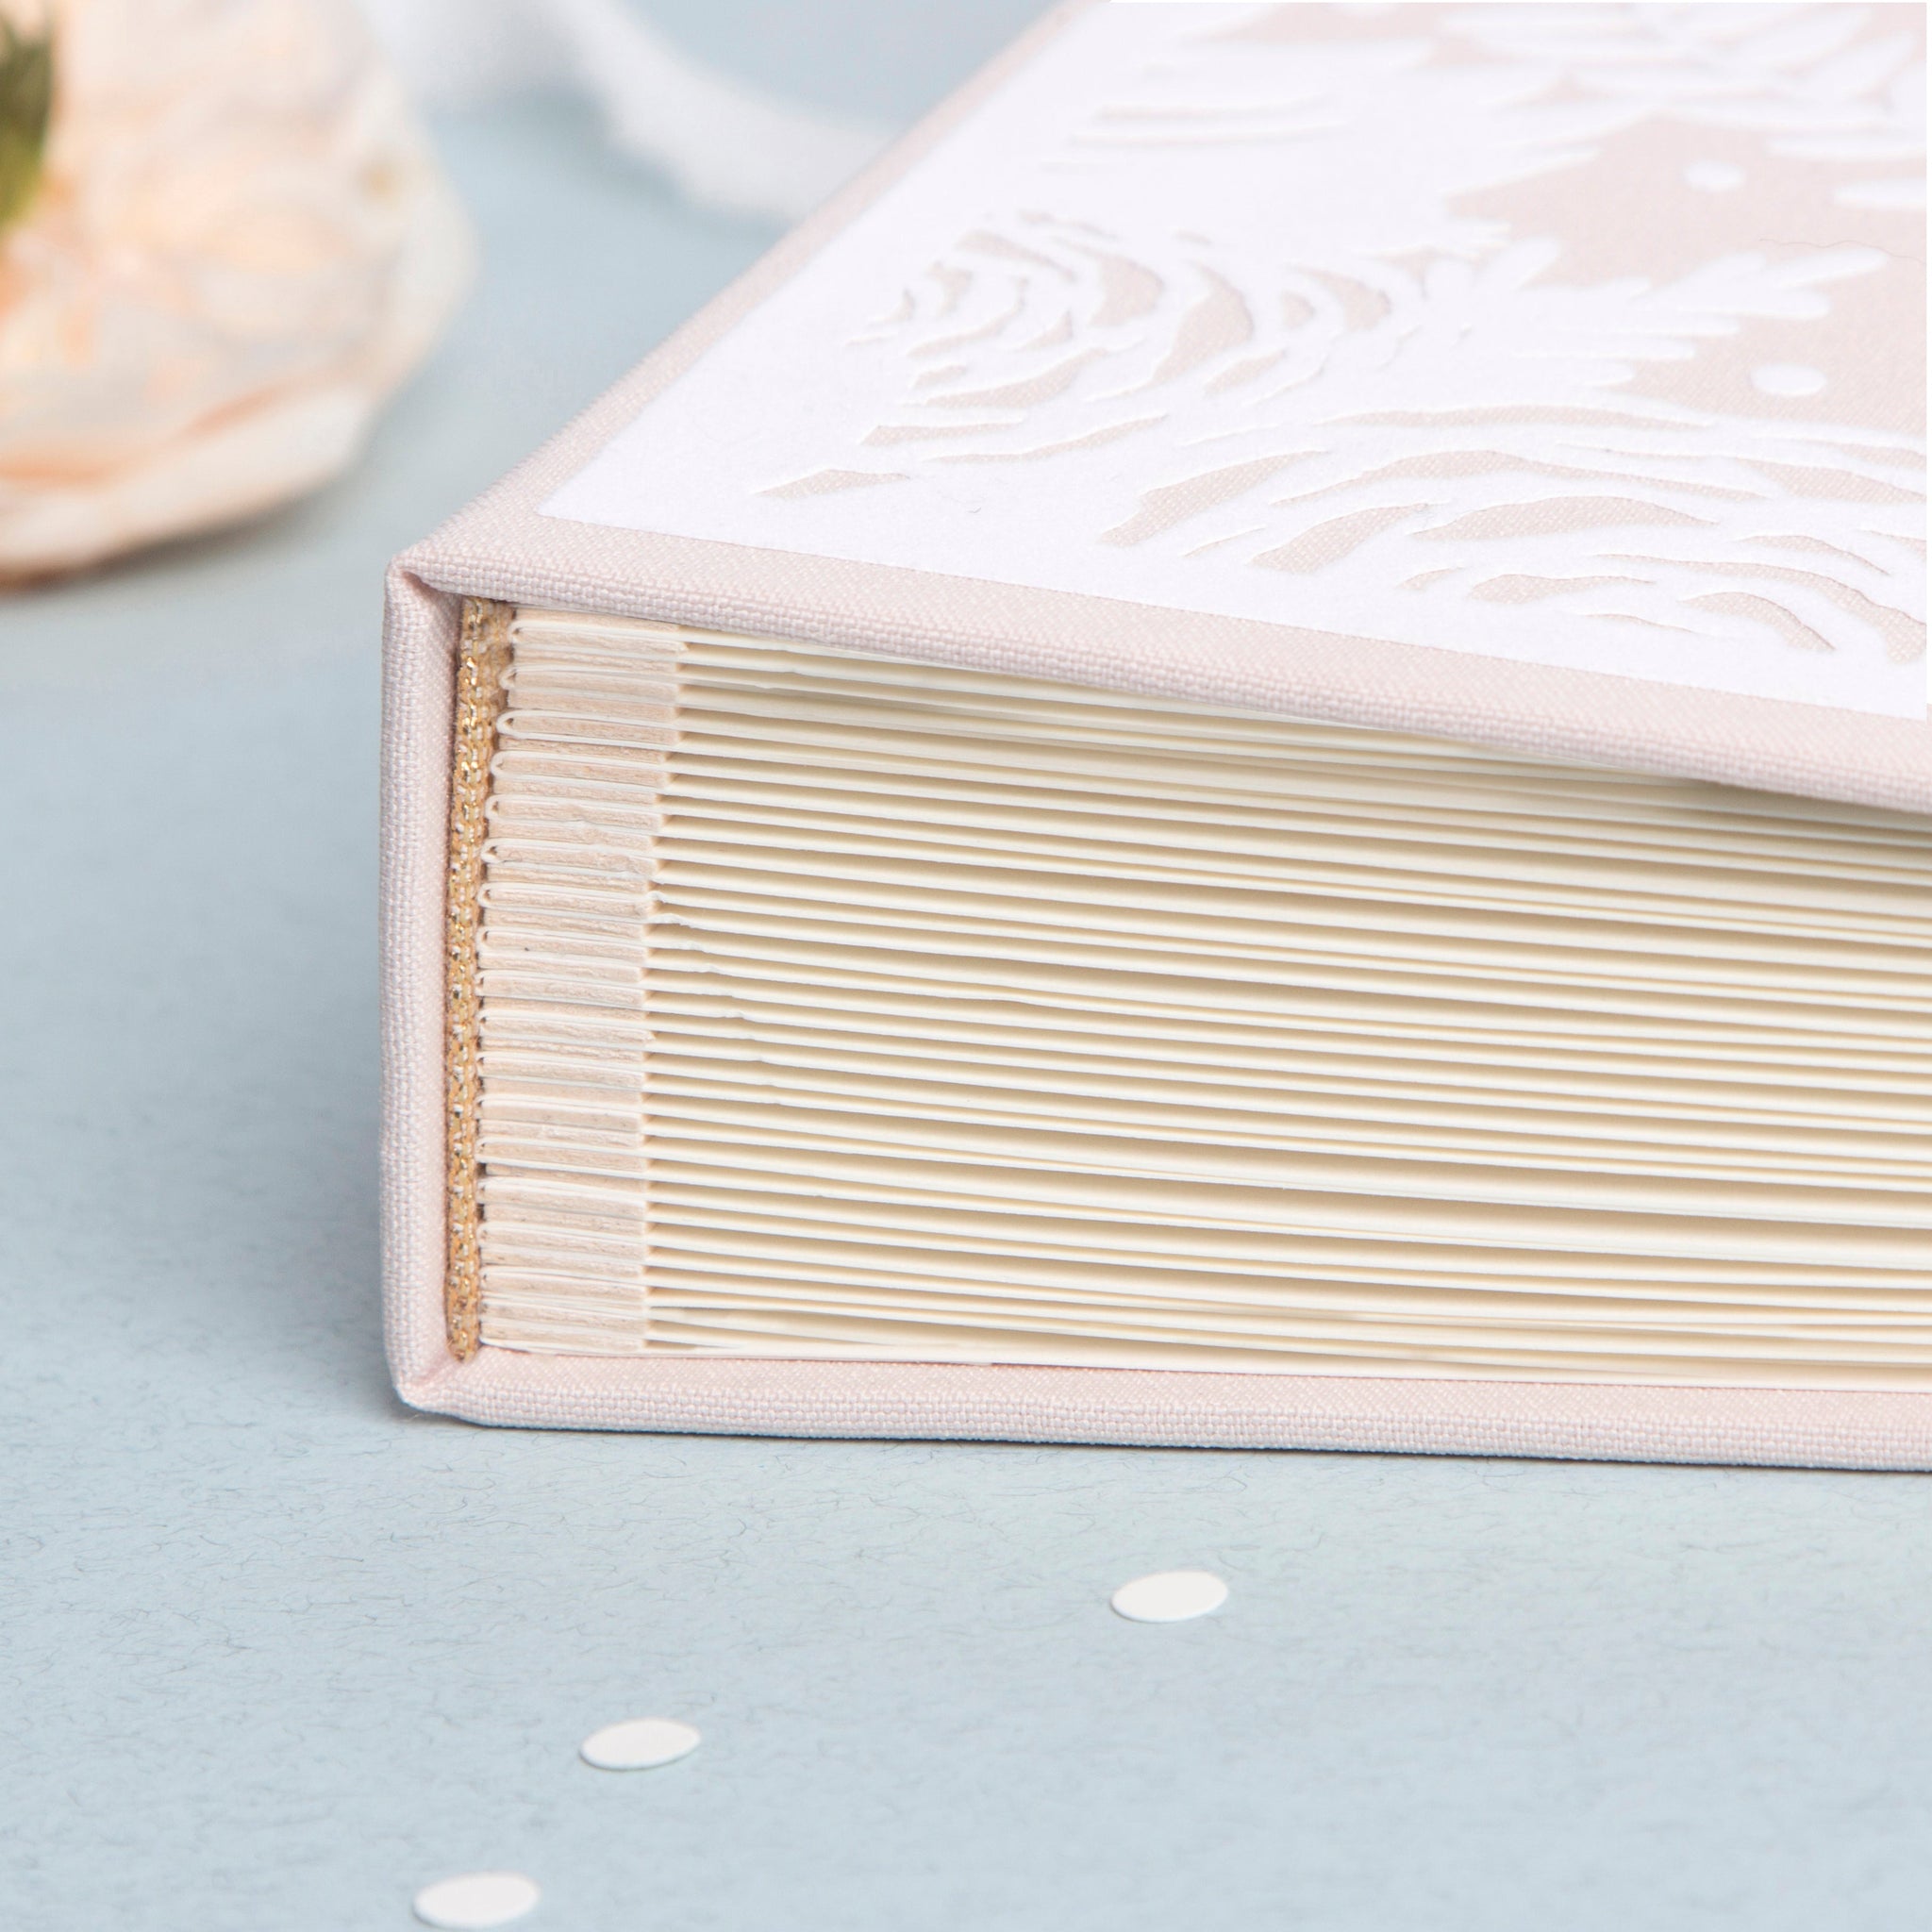 Exclusive Photo Guestbook Cream Embossed White Velour Cover Instant Wedding Album by Liumy - Liumy 